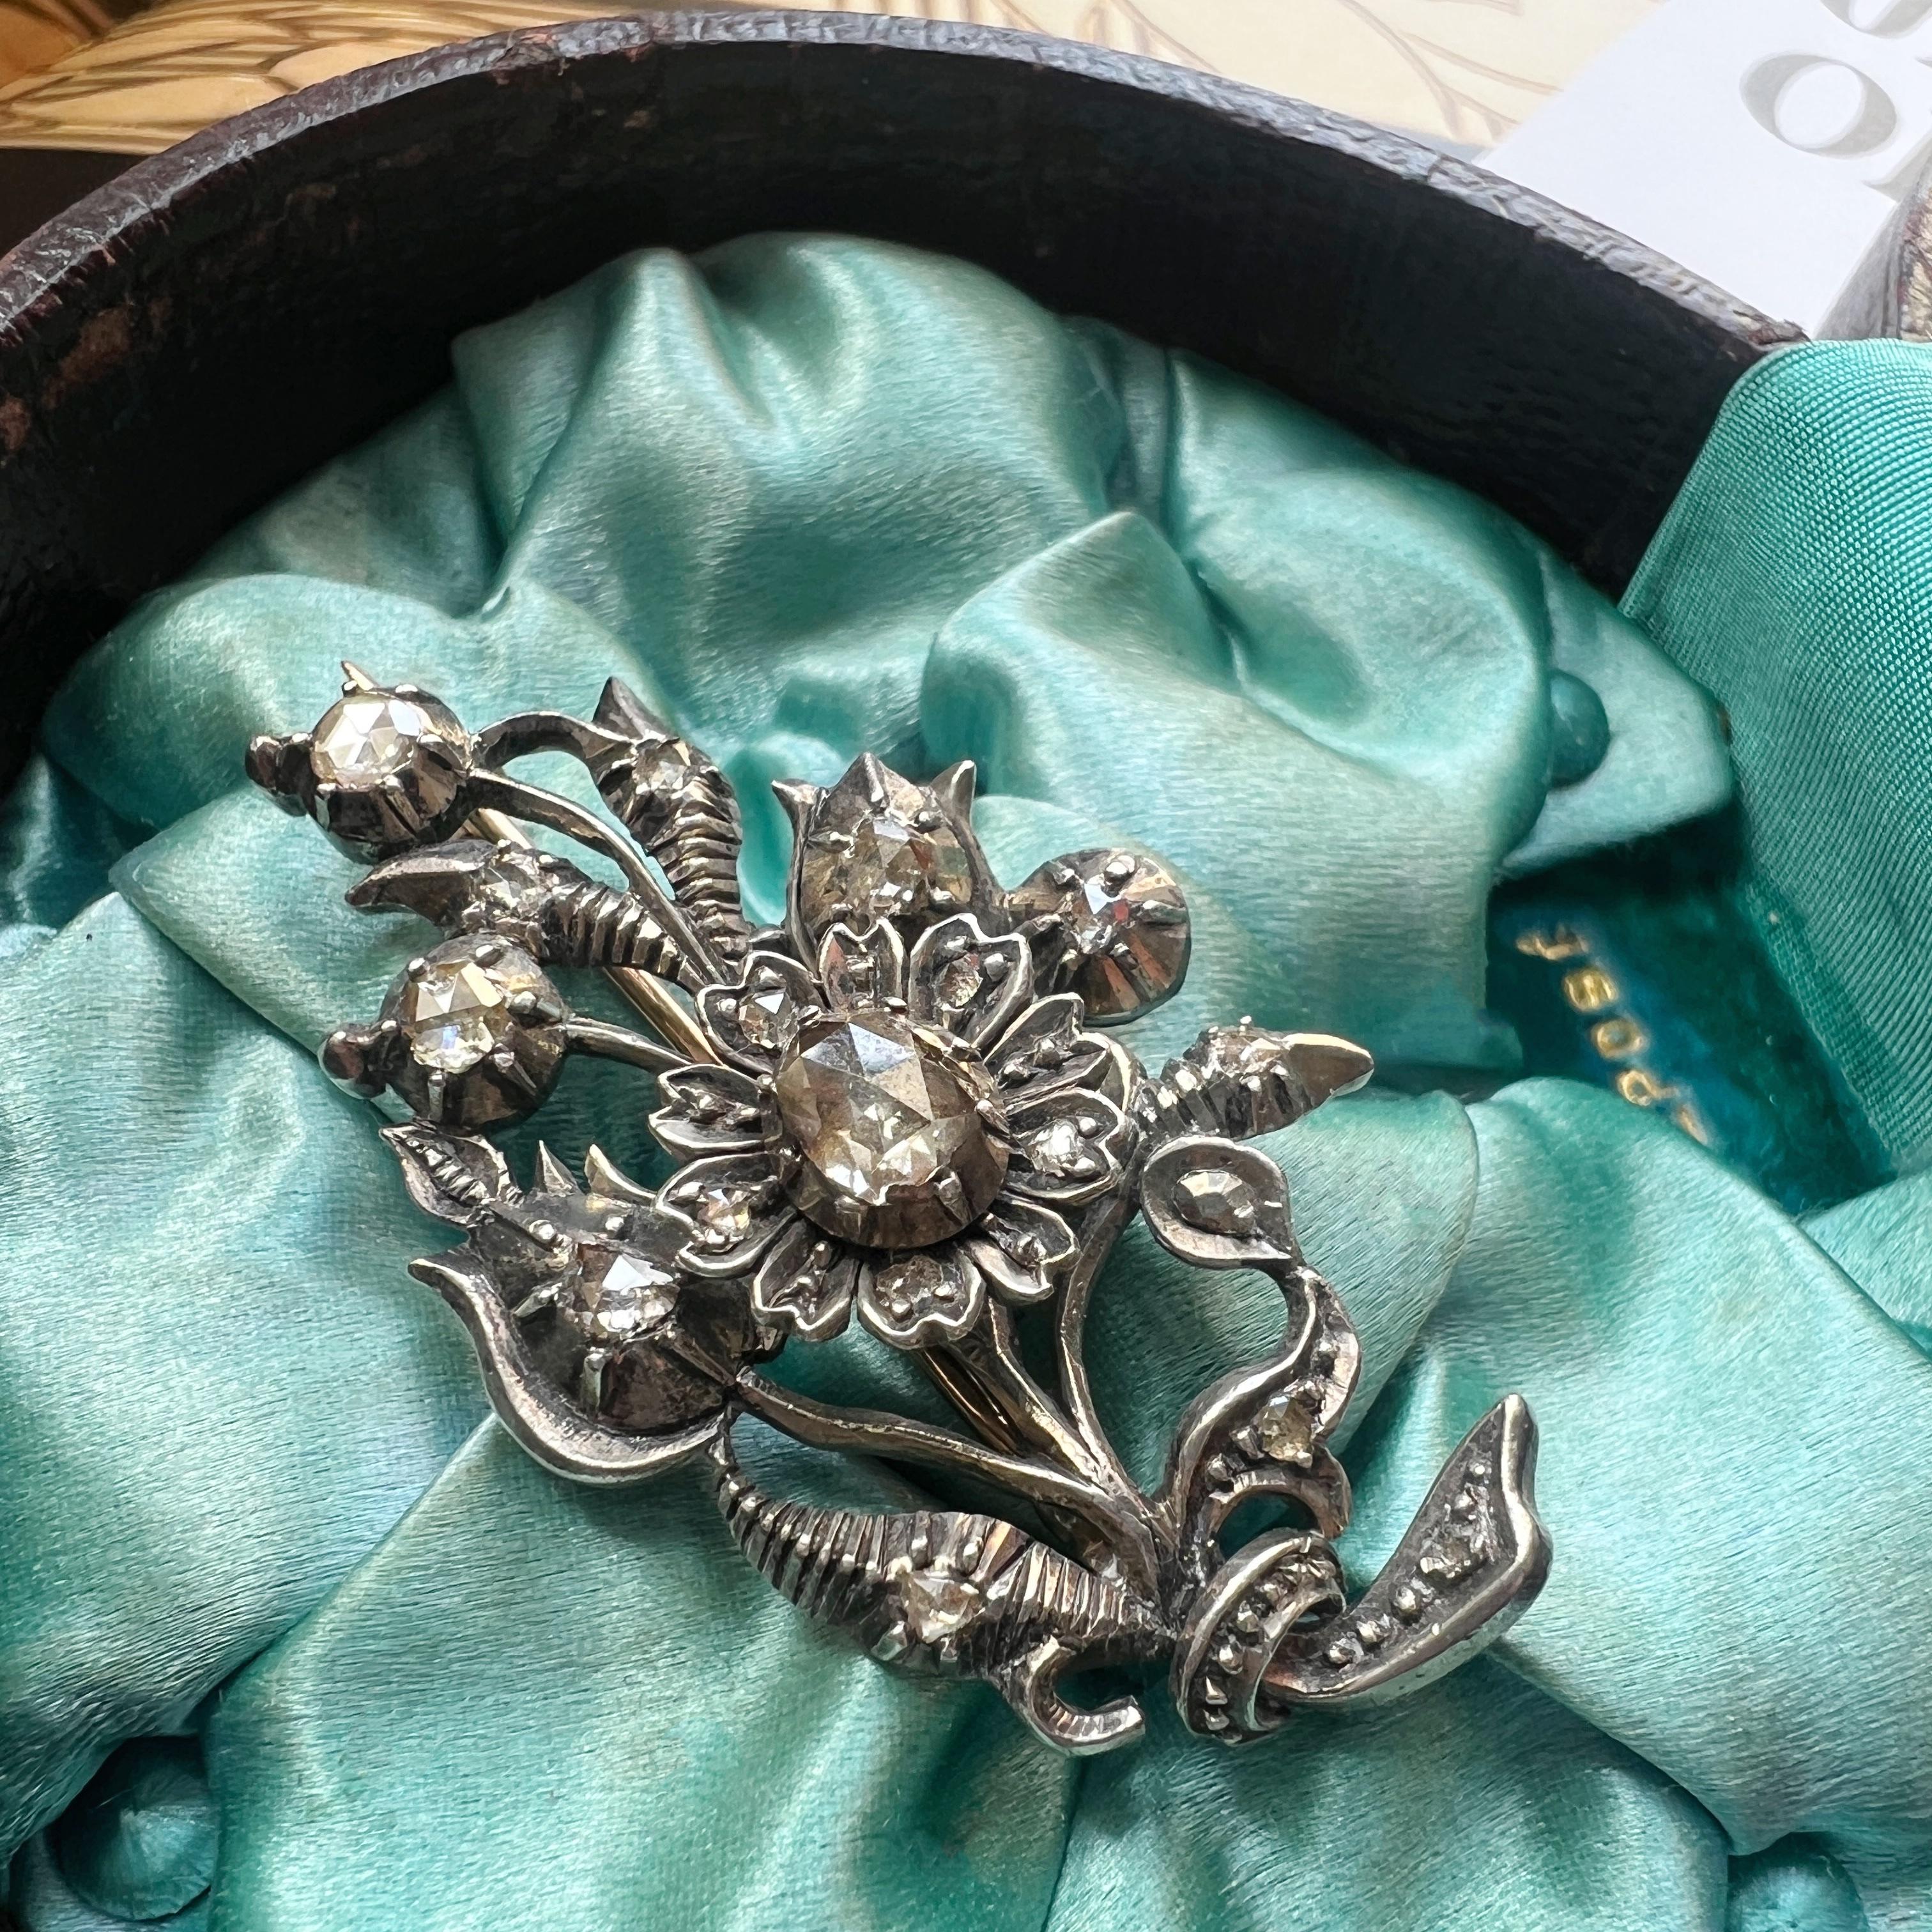 For sale a lovely rose cut diamond bouquet flower brooch, dated back to the late 18th century / the beginning of the 19th century.

Each flower in the brooch is adorned with a rose-cut diamond, with the largest measuring approximately 7mm in